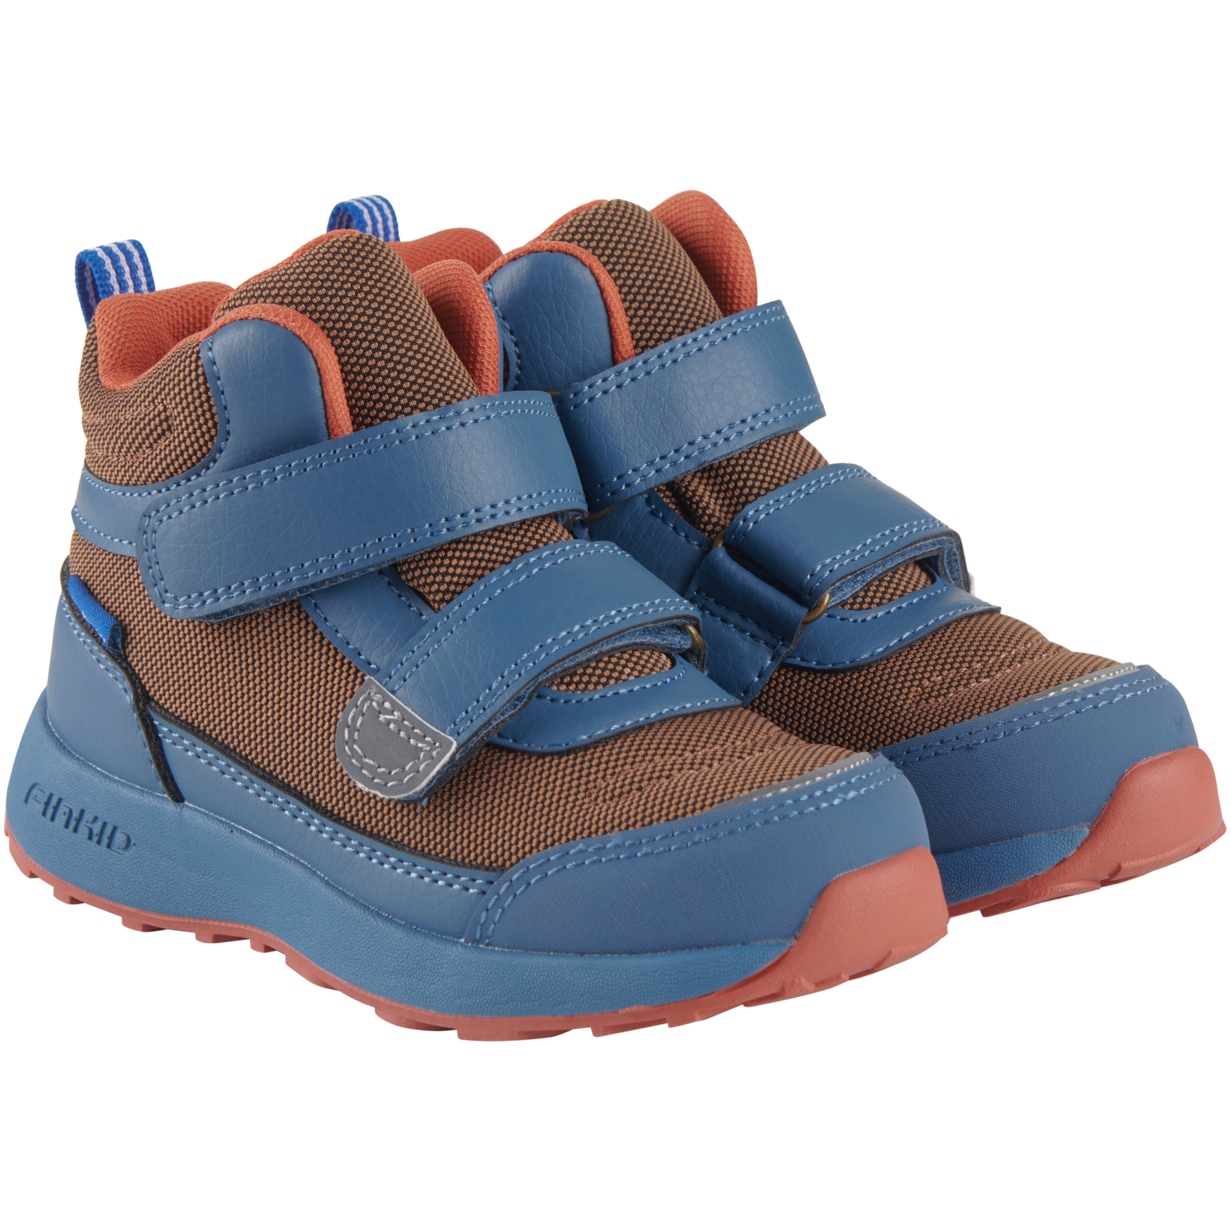 Image of Finkid SOMERO Outdoor Shoes - Kids Hiking Shoes - almond/real teal